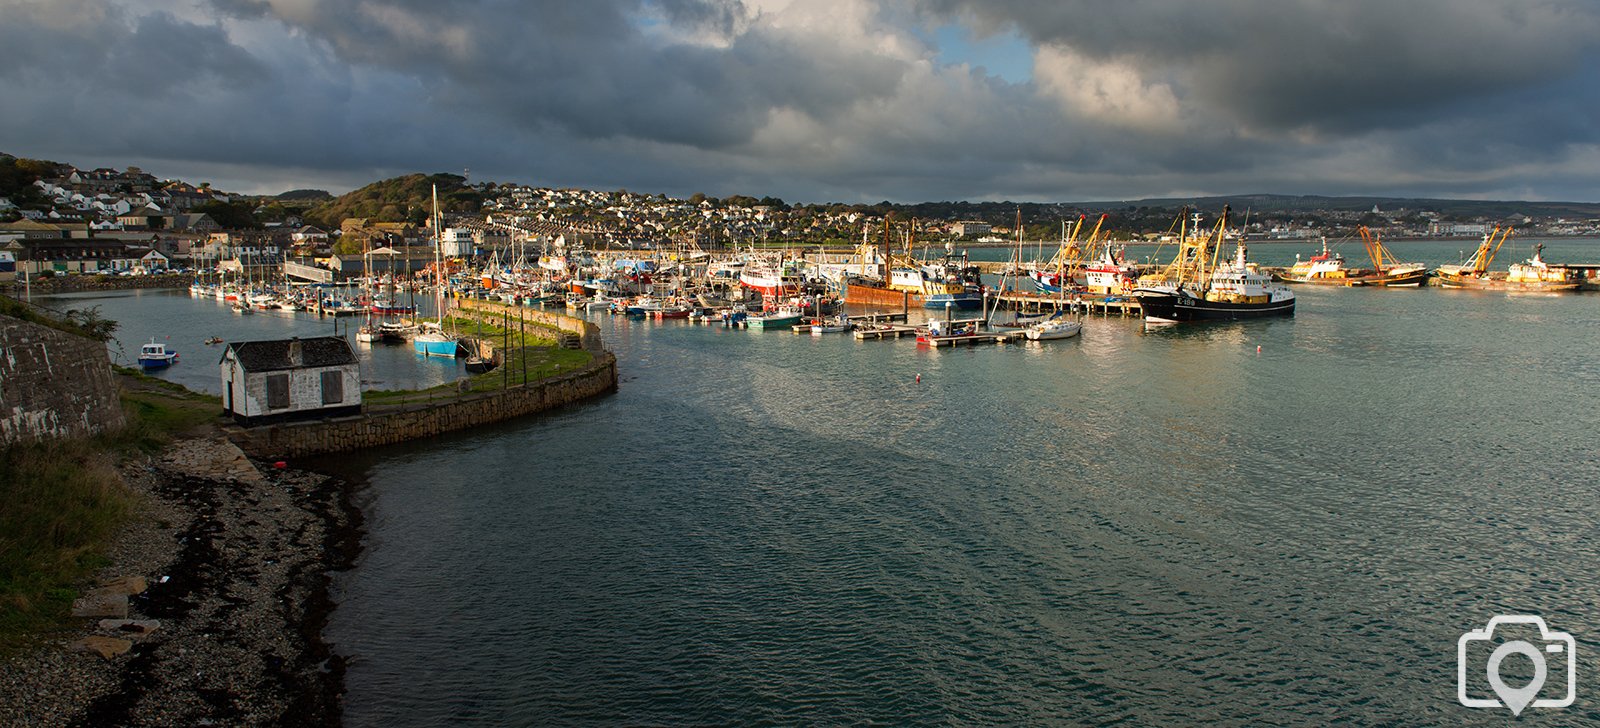 Early Evening In The Harbour